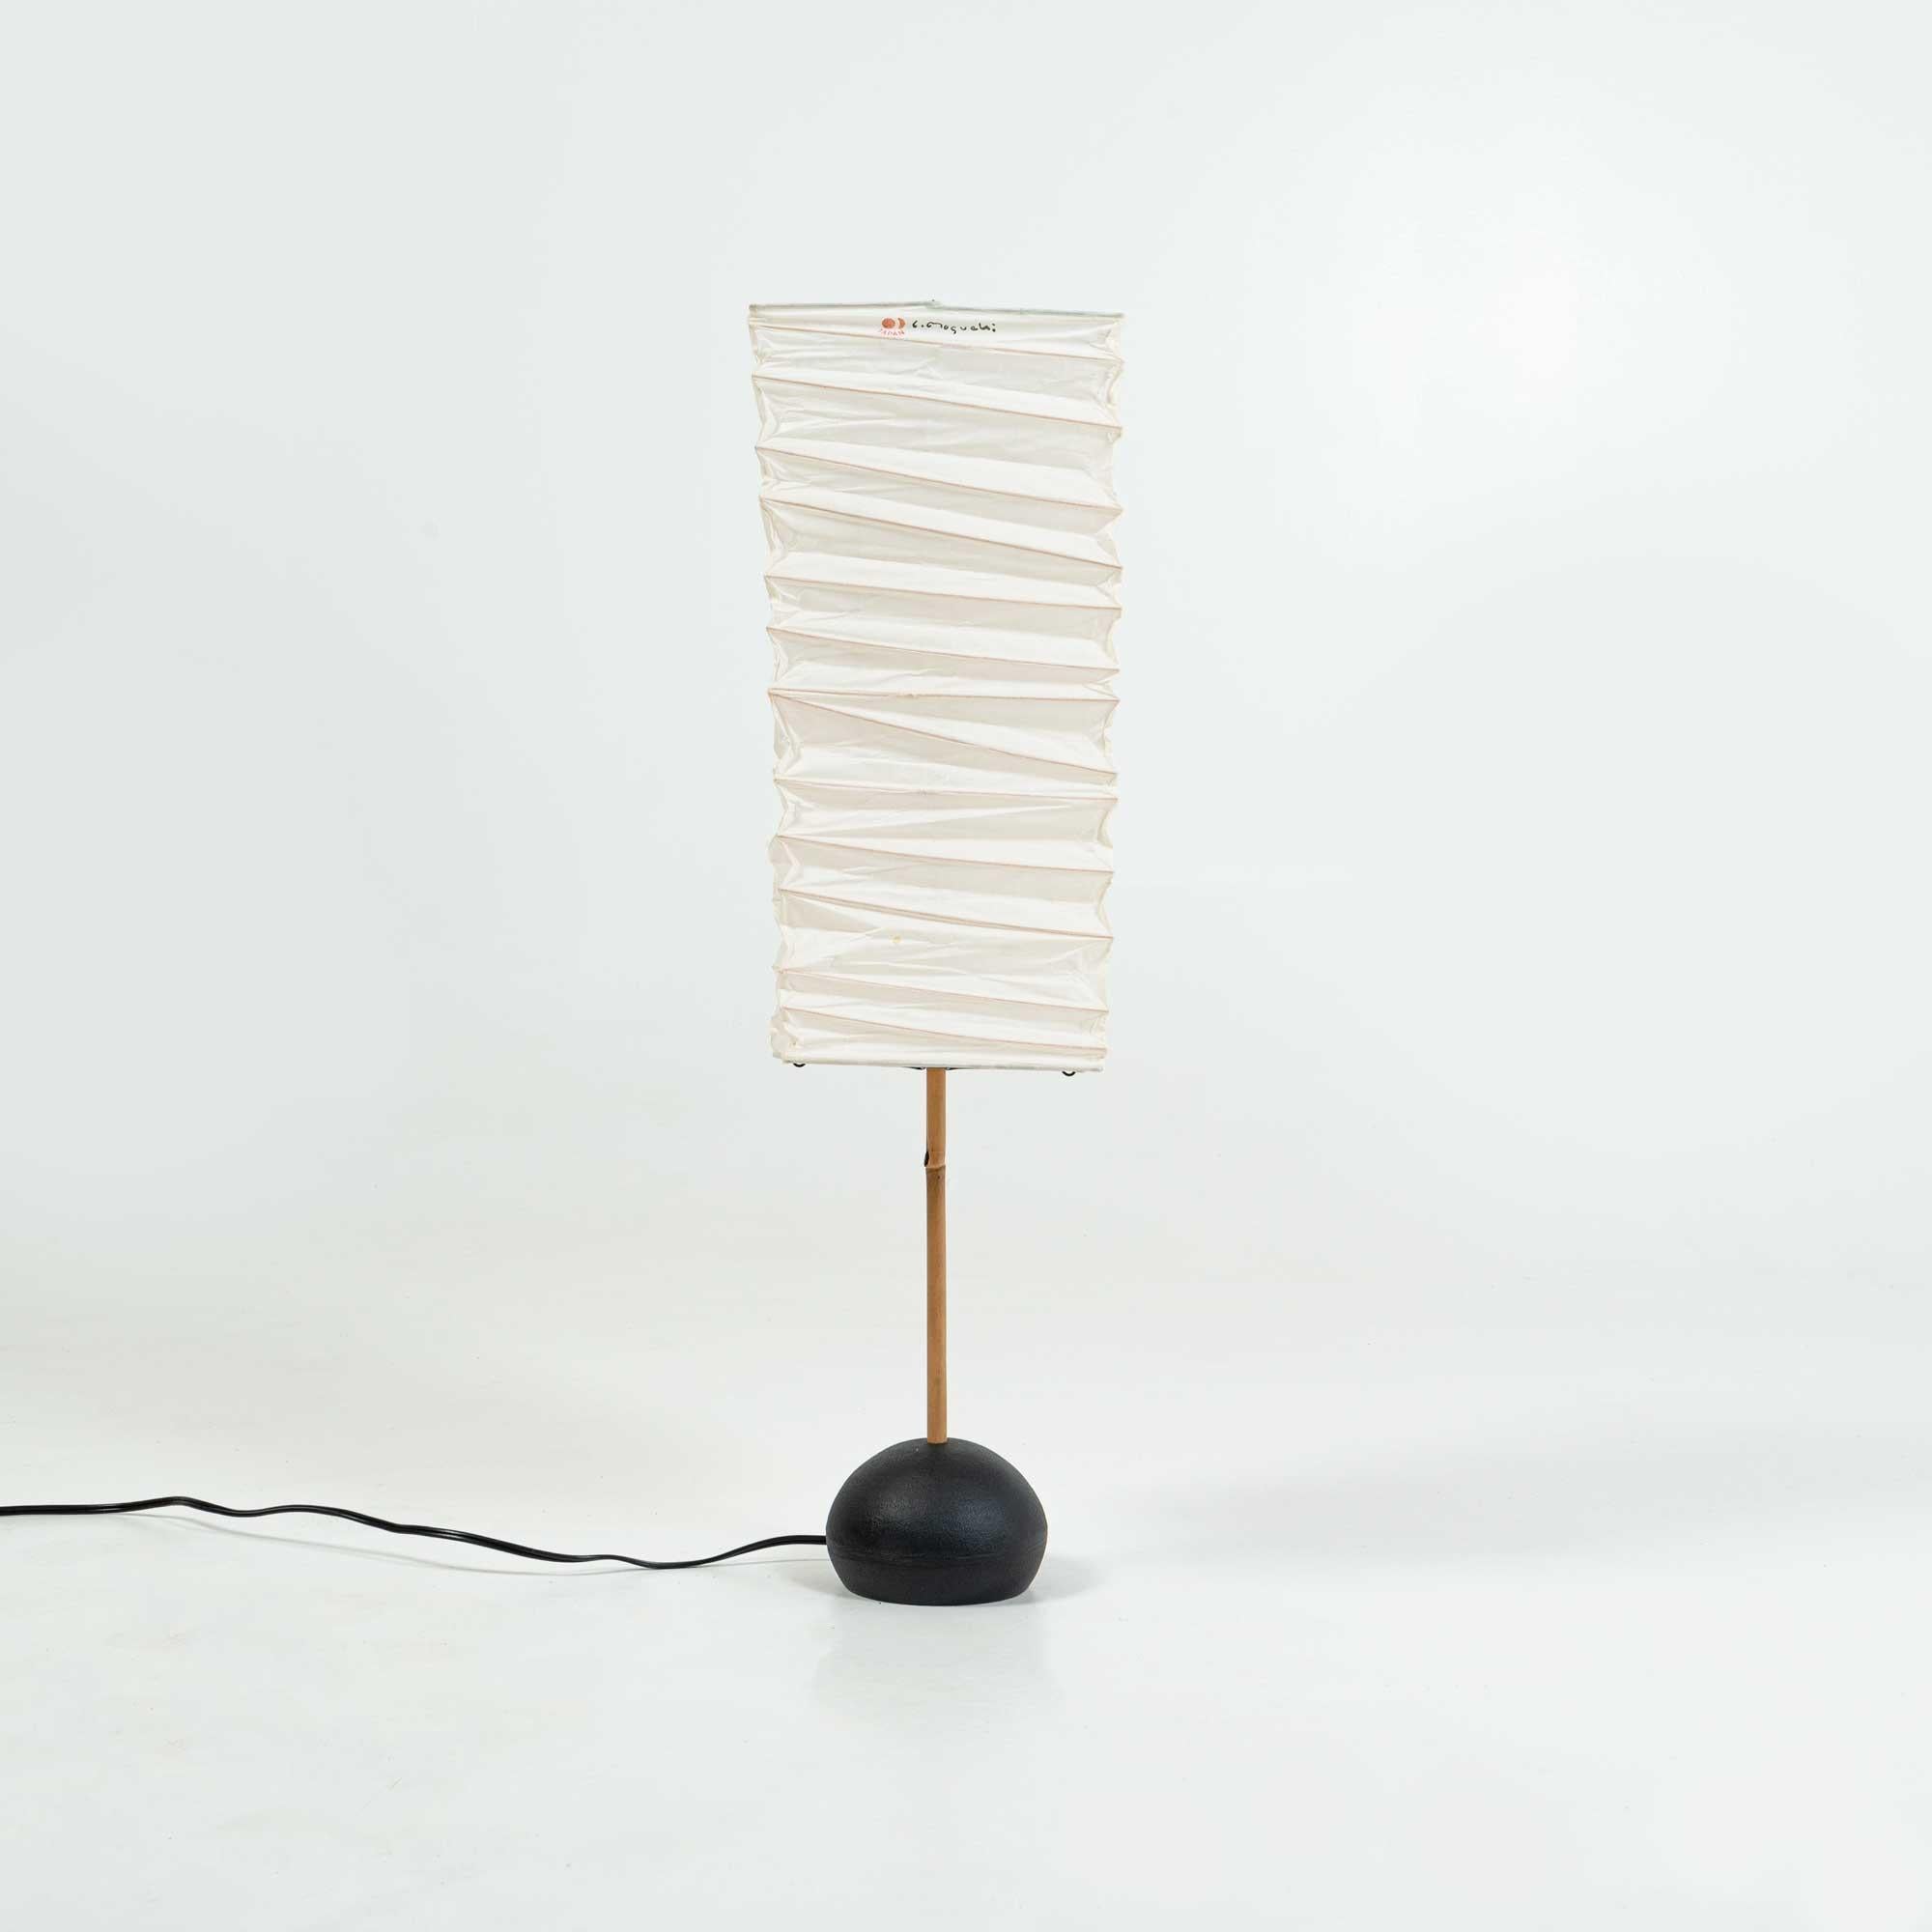 A 1990s production of the Isamu Noguchi Table Lamp, BB2 base with 45XN shade. Overall in great condition, some light discoloration on the shade, some patina on the metal base. wired 110v. Ready for use.